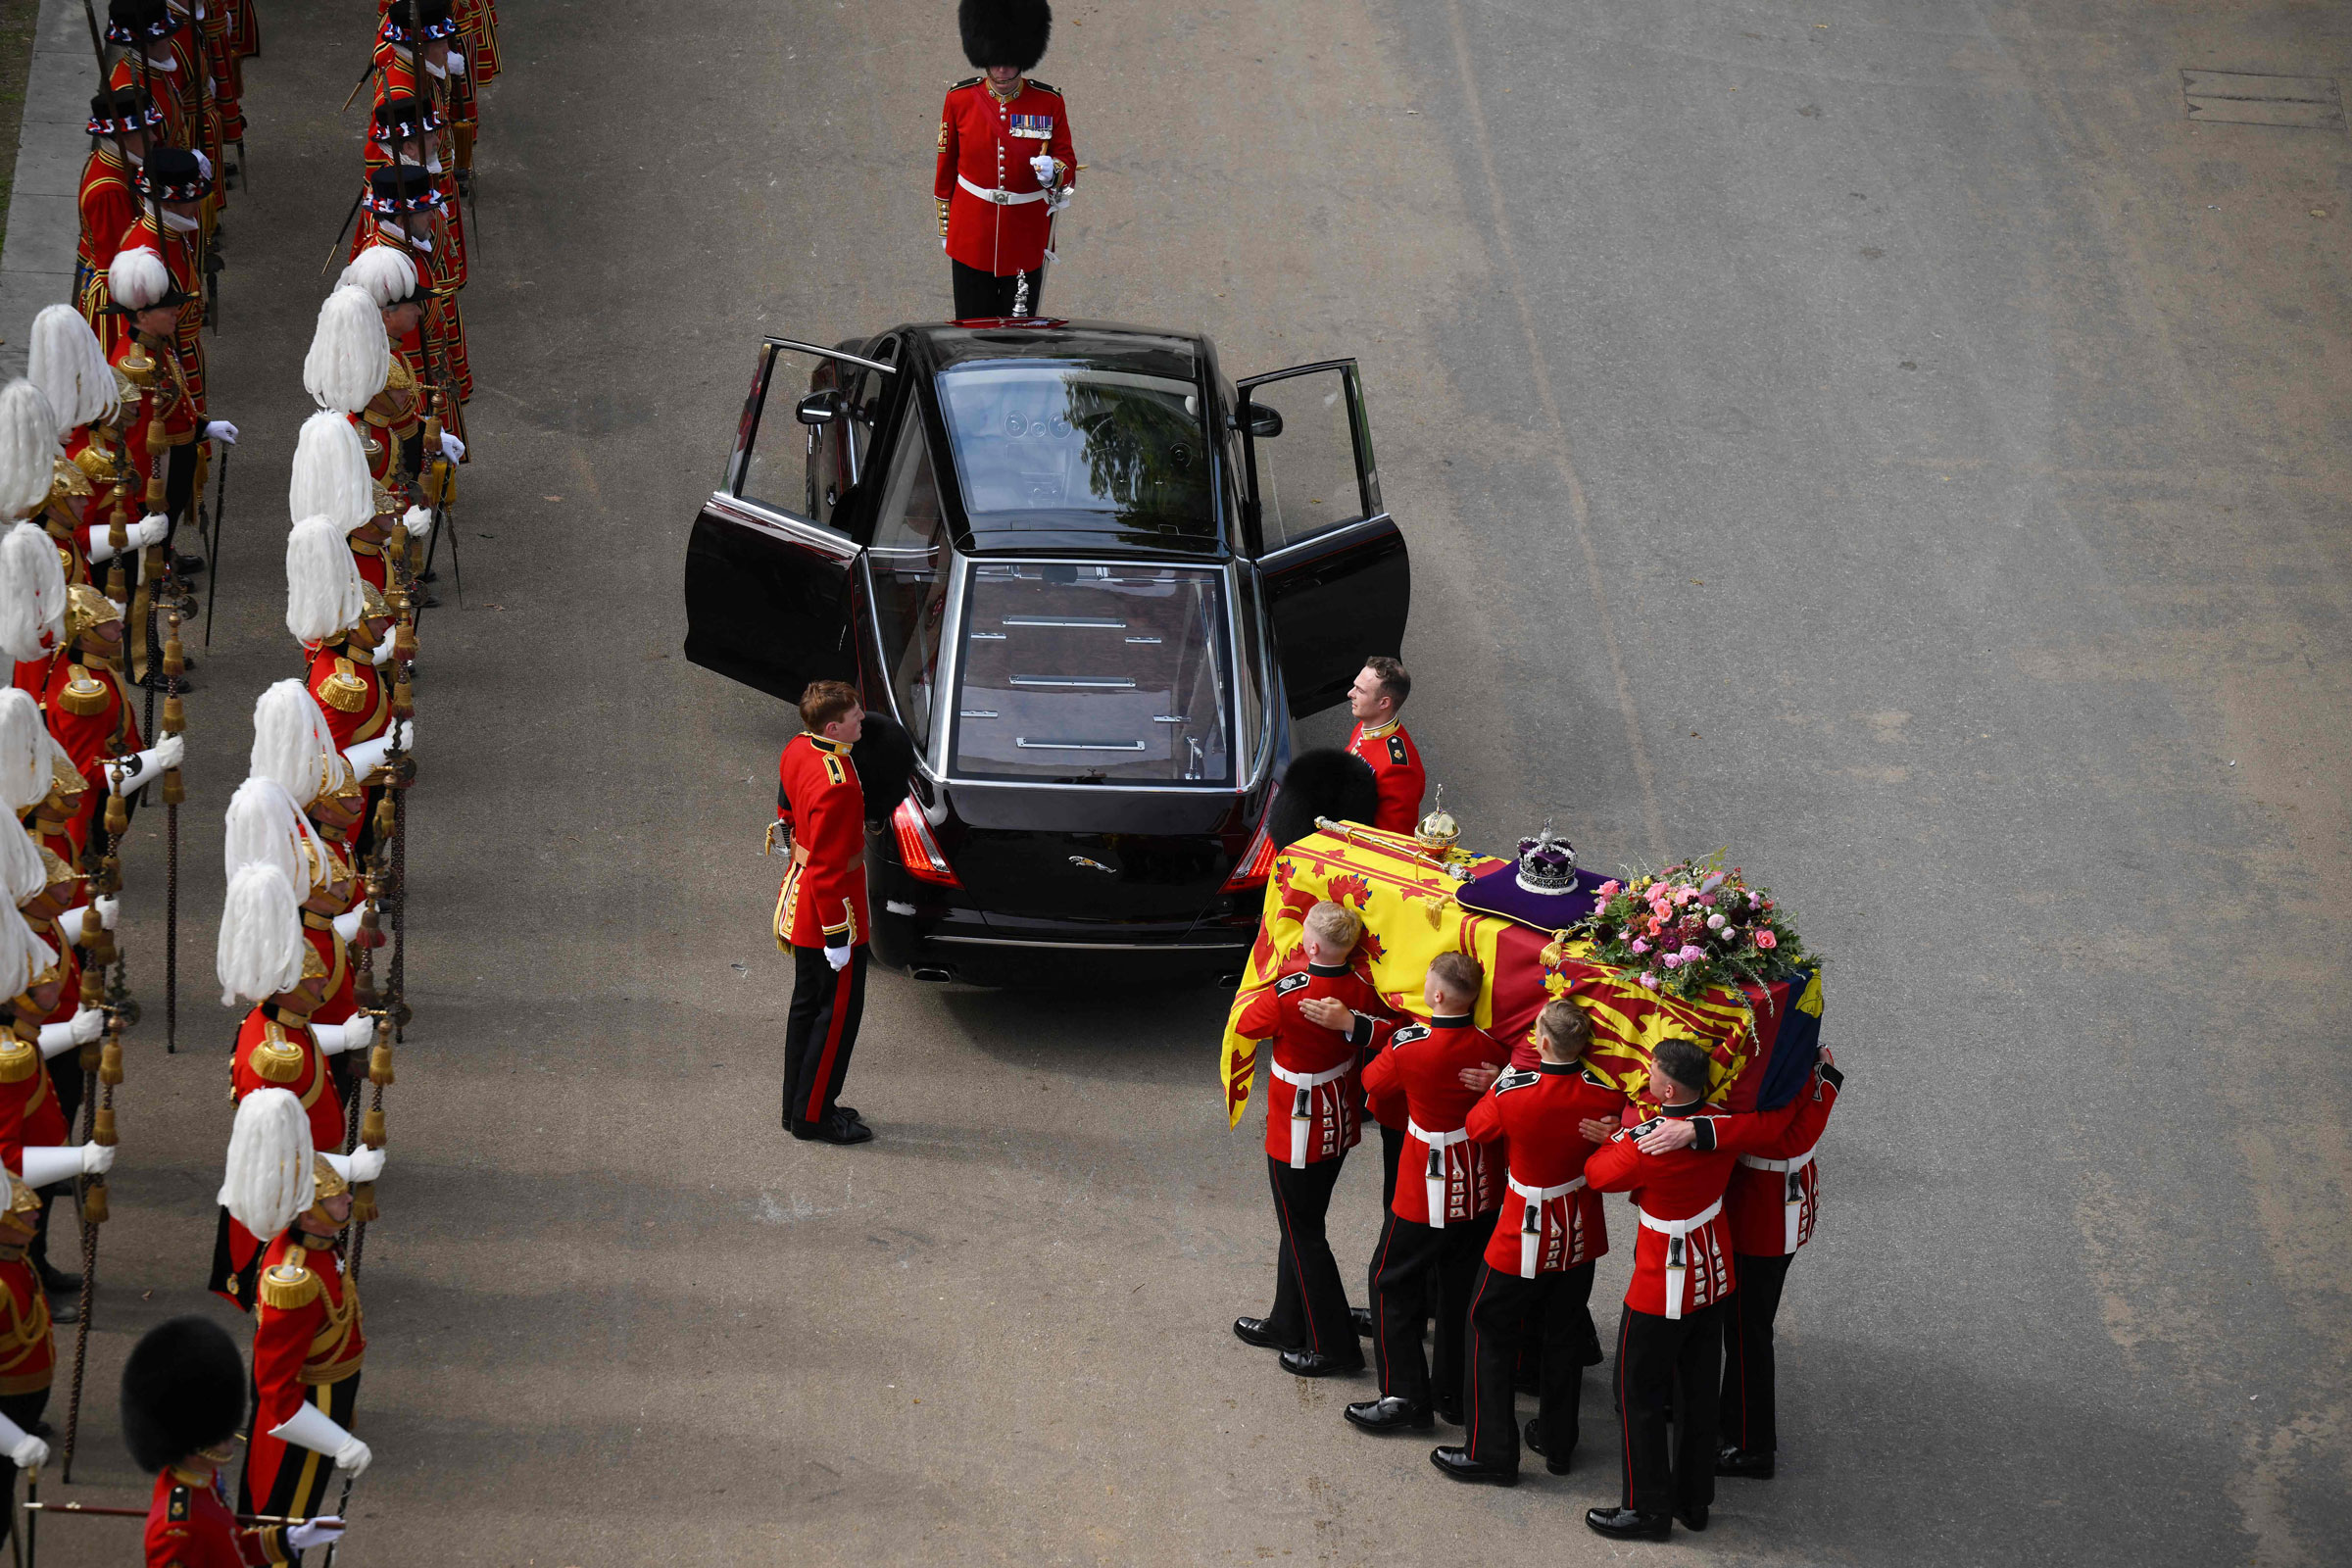 The Bearer Party transfer the coffin of Queen Elizabeth II, draped in the Royal Standard, into the State Hearse at Wellington Arch, after the State Funeral Service of Britain's Queen Elizabeth II. (Daniel Leal—AFP/Getty Images)